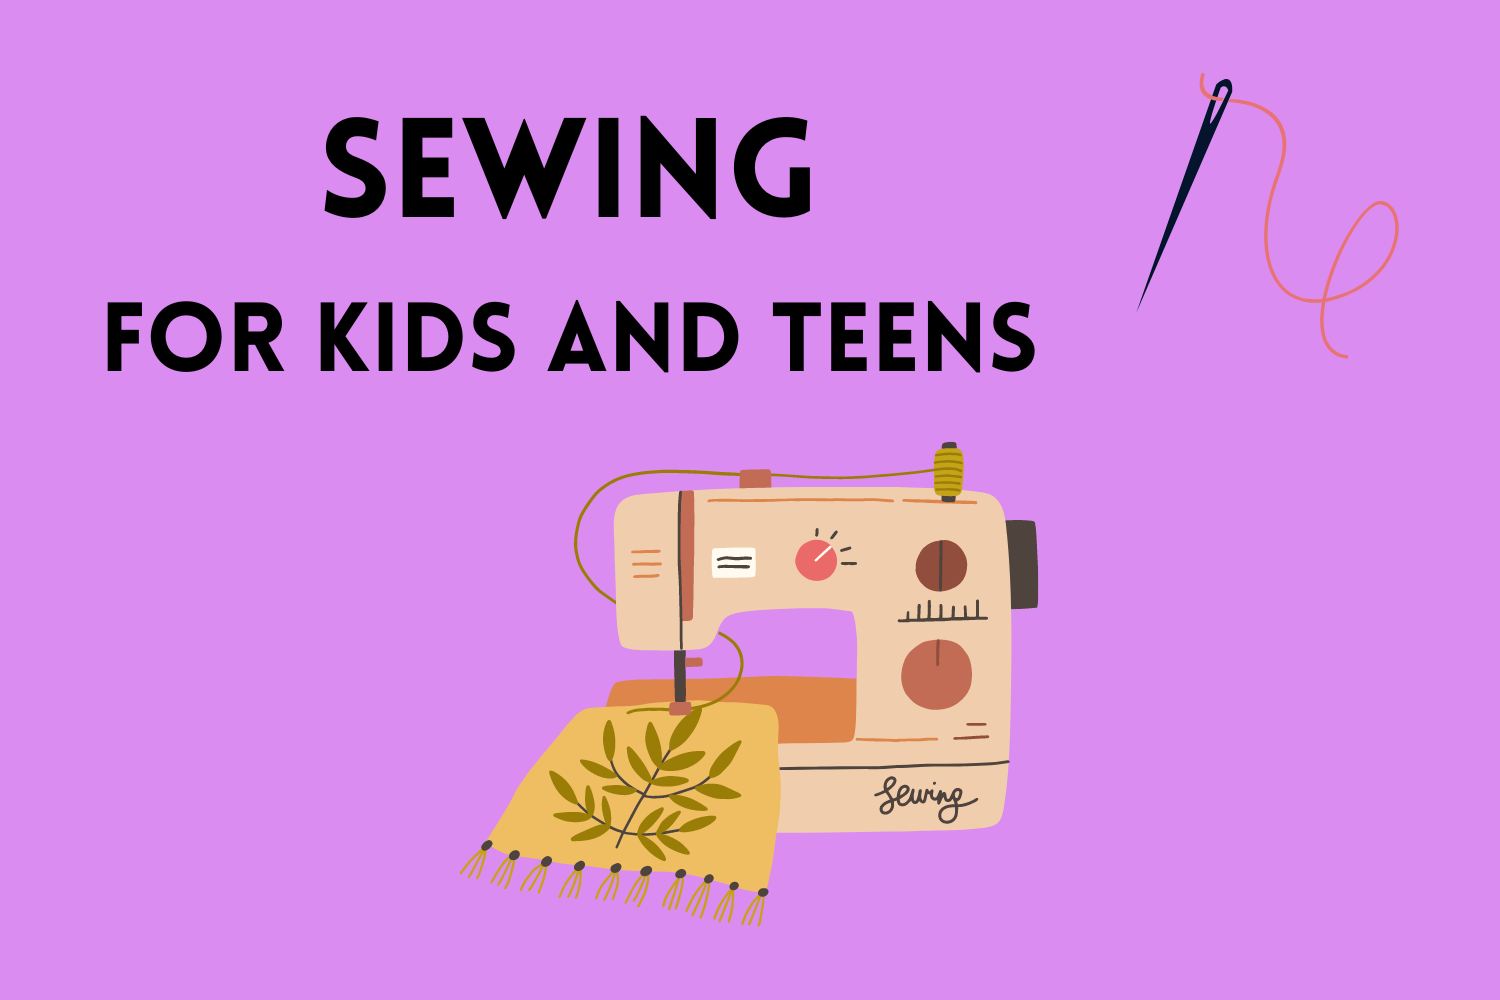 Image that says "sewing for kids and teens"